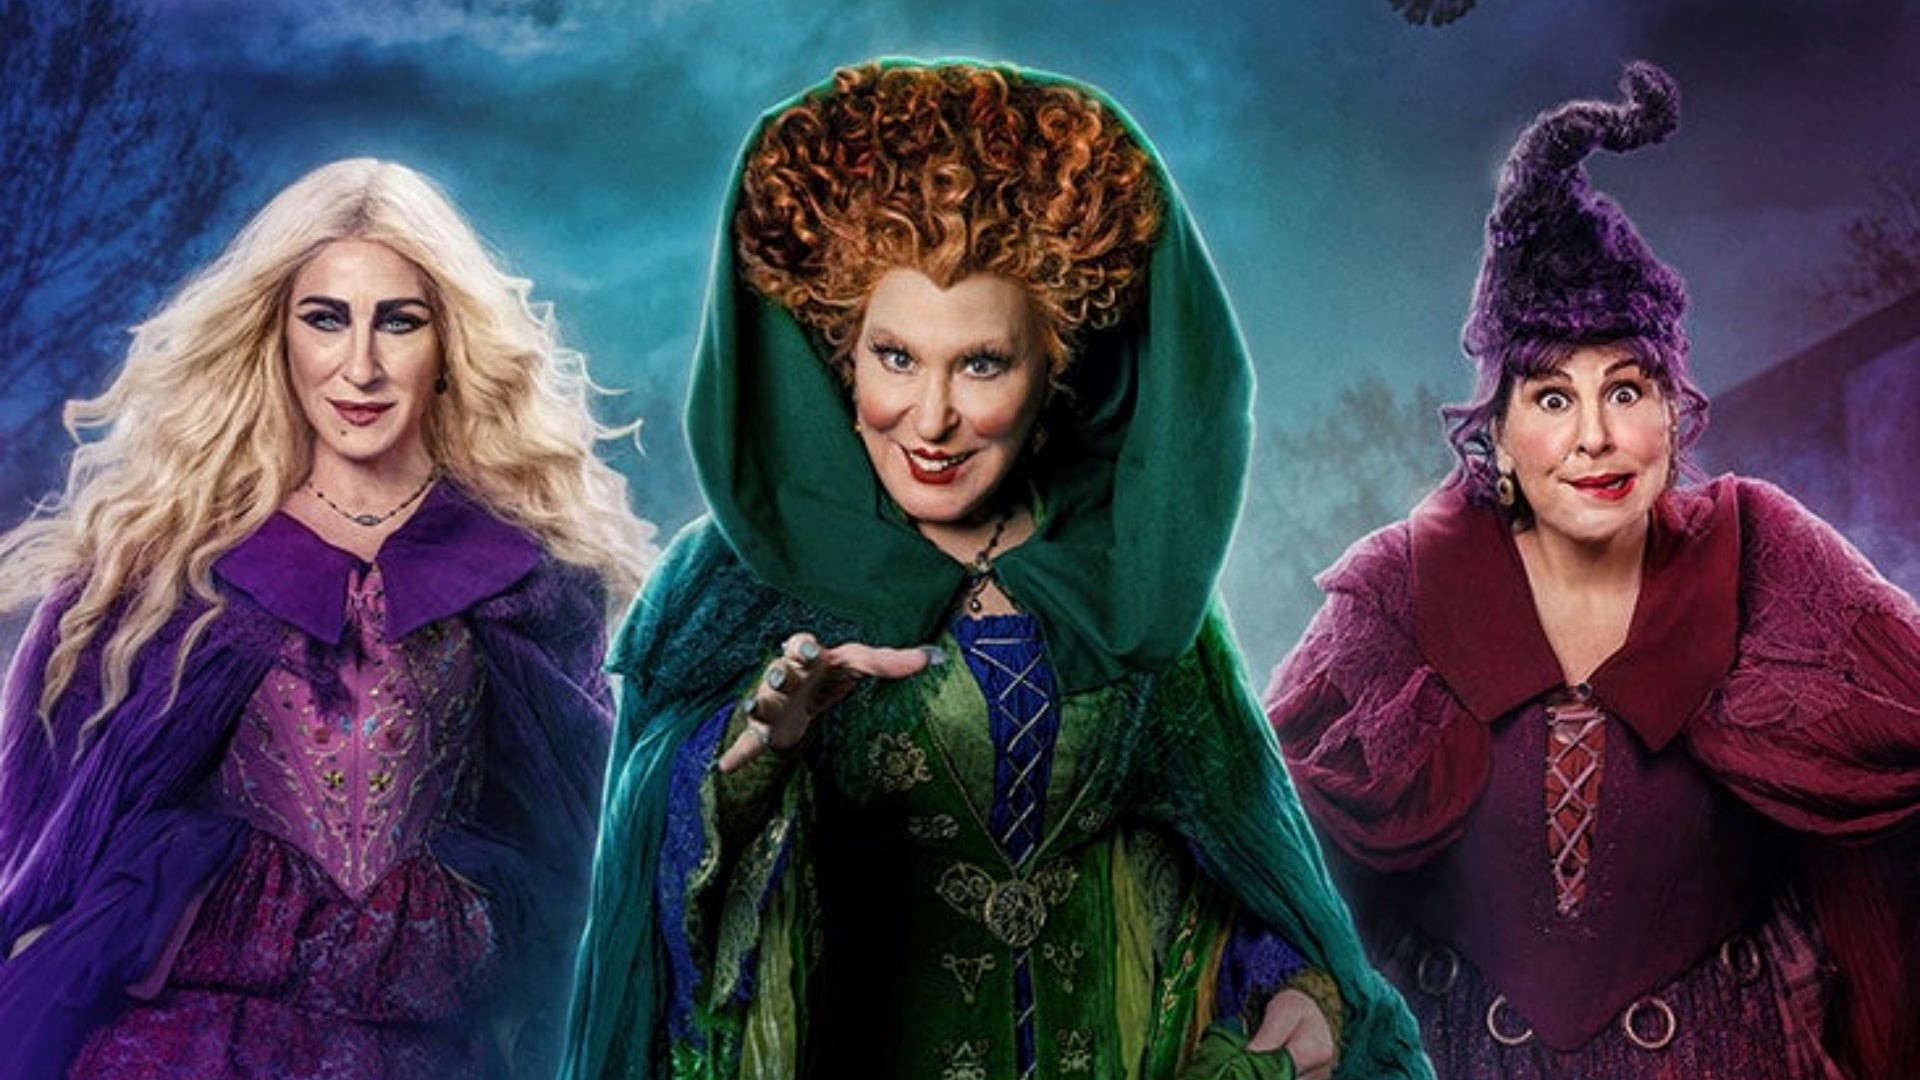 The Sanderson sisters are back in Salem! Preview the highly-anticipated return of 'Hocus Pocus' streaming on Disney+.